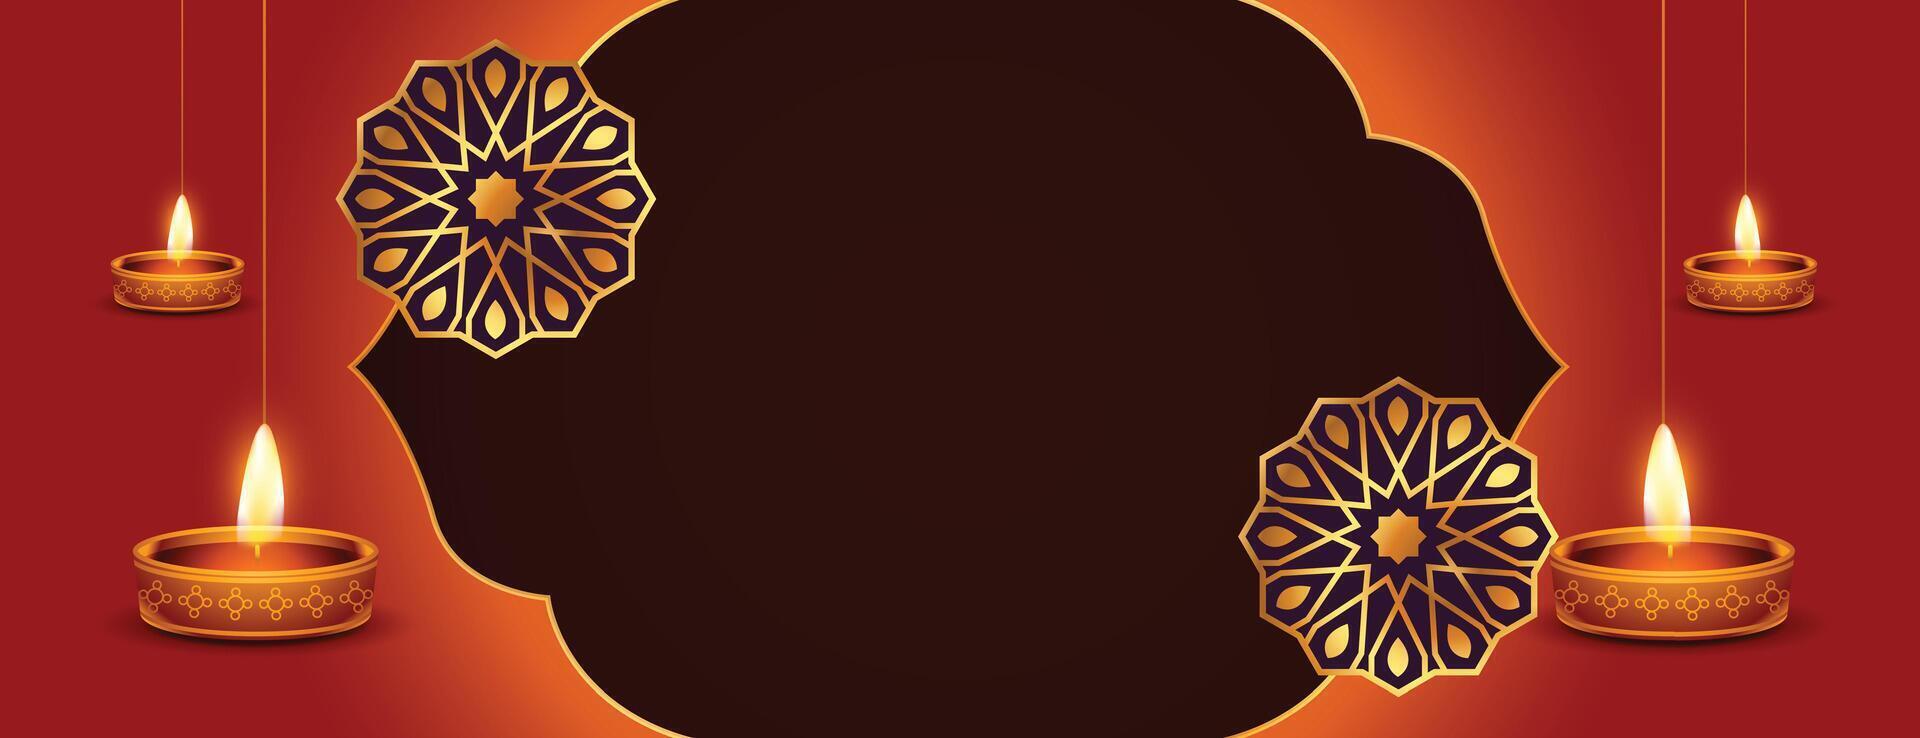 happy diwali banner in indian style with hanging diya and text space vector